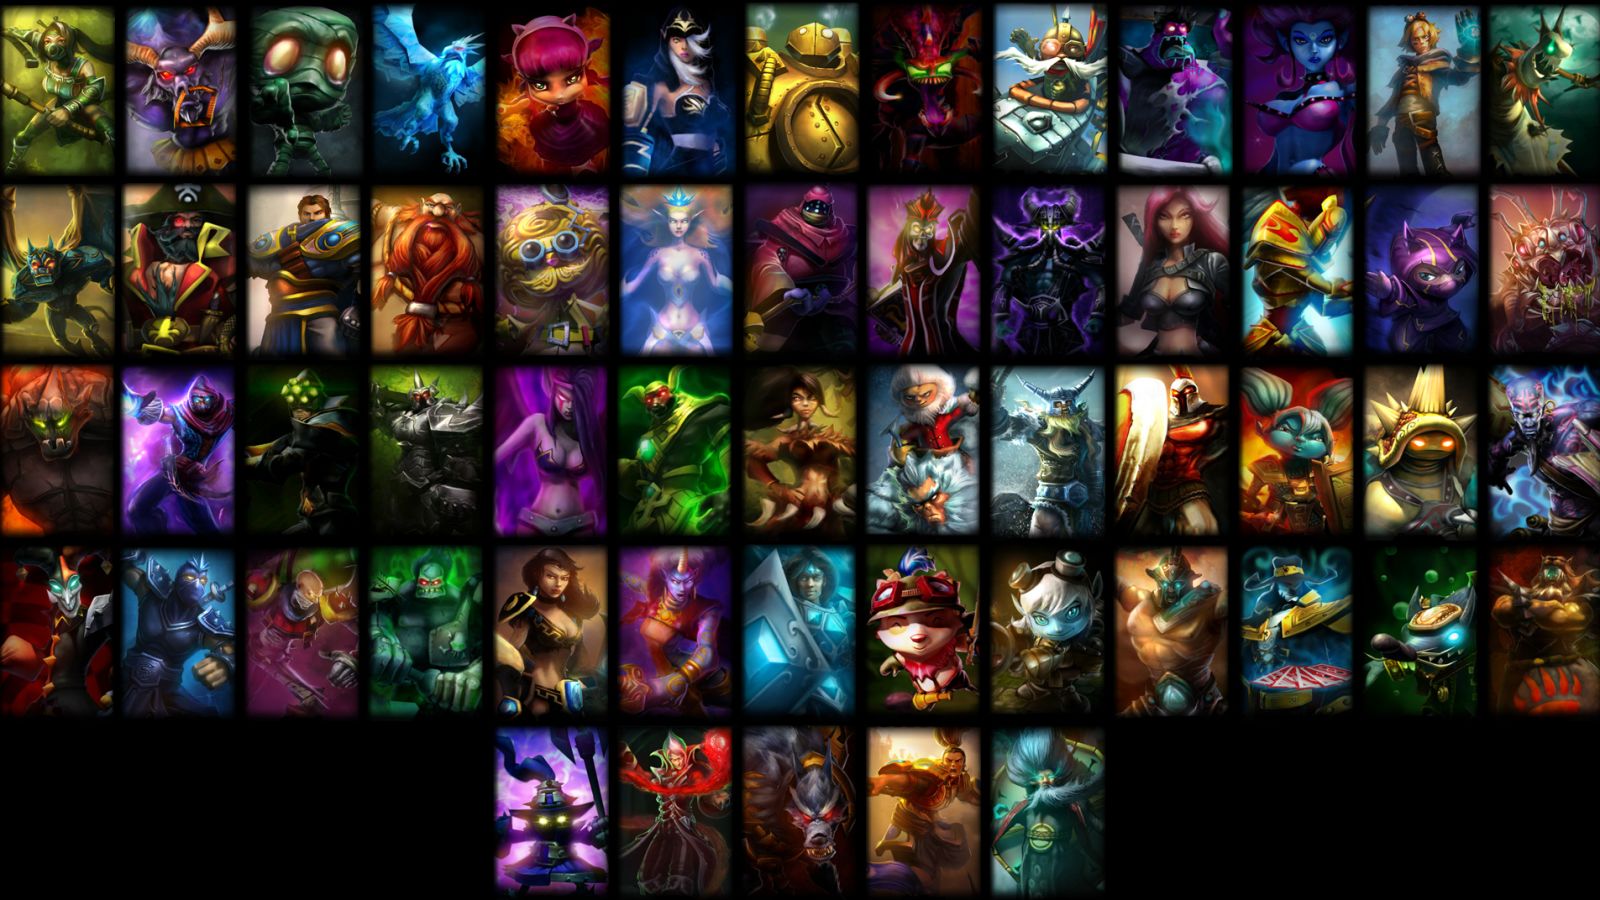 how many champions are in league of legends